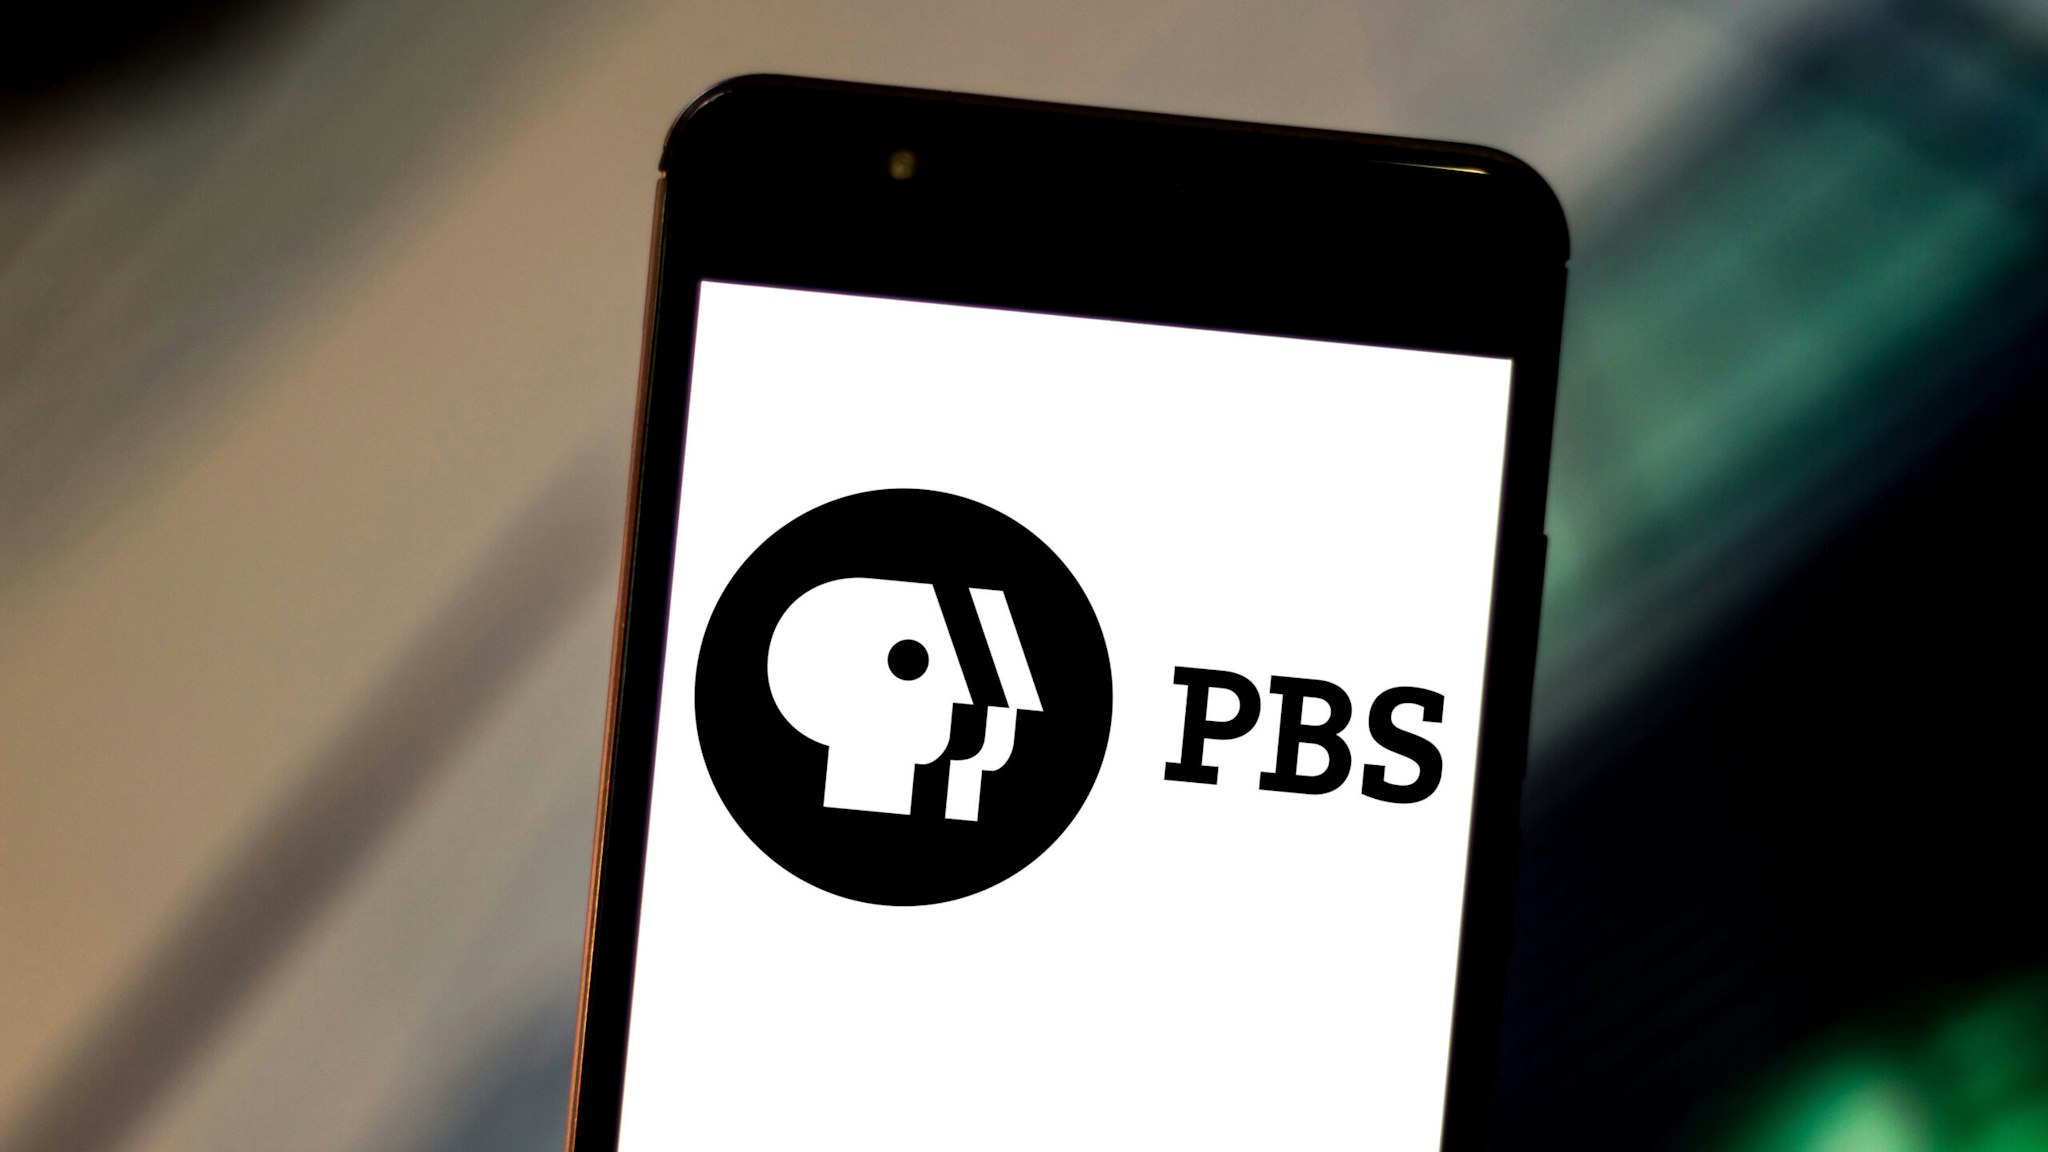 BRAZIL - 2019/06/10: In this photo illustration the Public Broadcasting Service (PBS) logo is displayed on a smartphone.